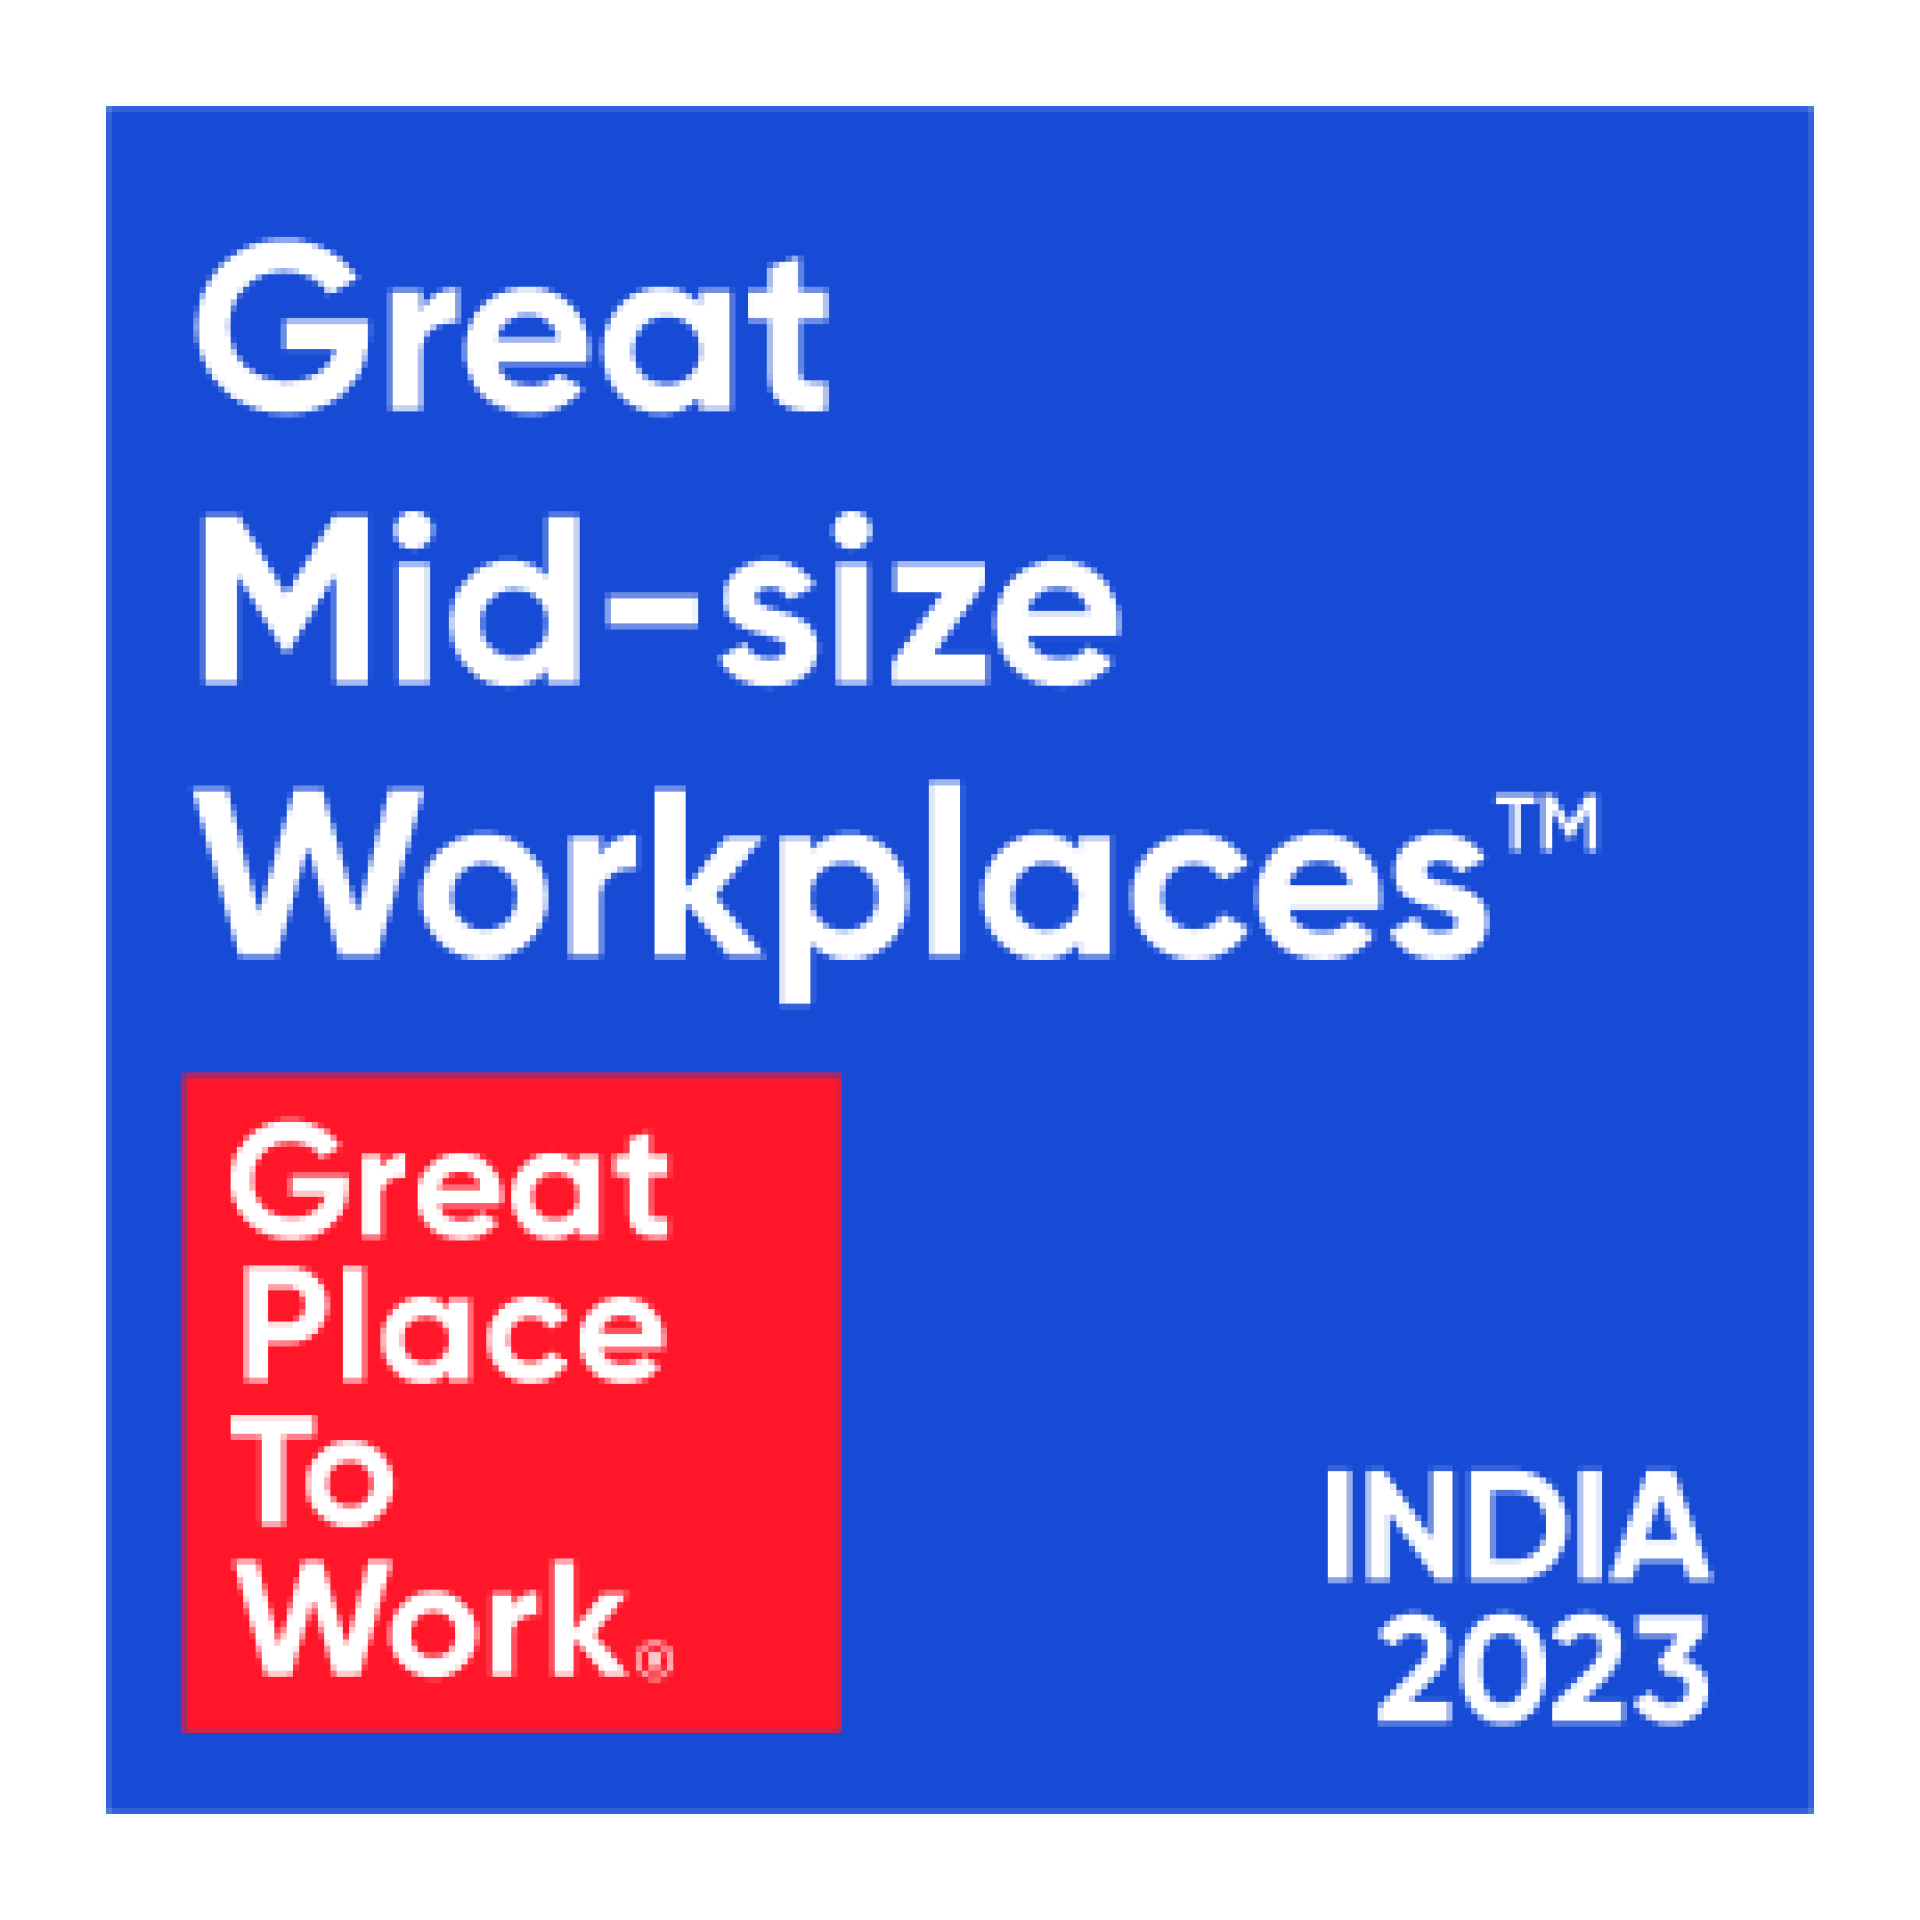 Hilti India Private Limited has been ranked the 16th Best Workplace in India